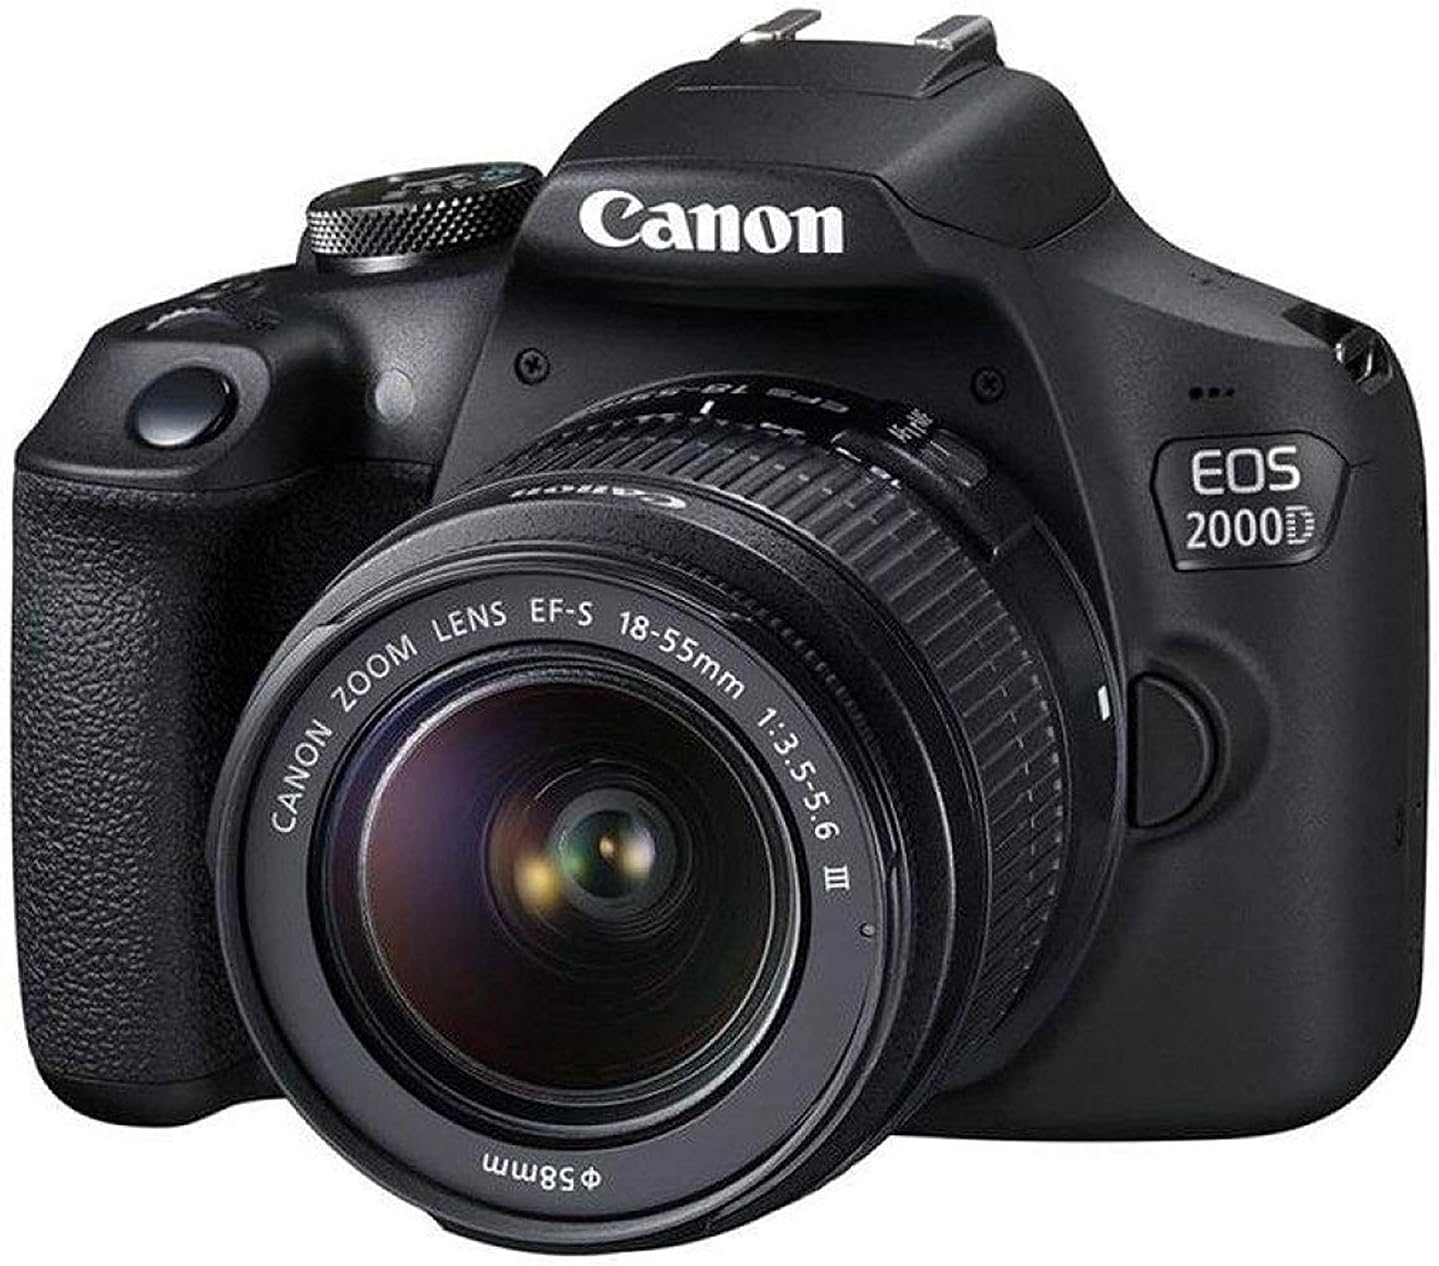 Canon EOS 2000D / Rebel T7 DSLR (New) 18-55 Lens, Wi-Fi, Filter, Bag, Card and Many More - image 2 of 9